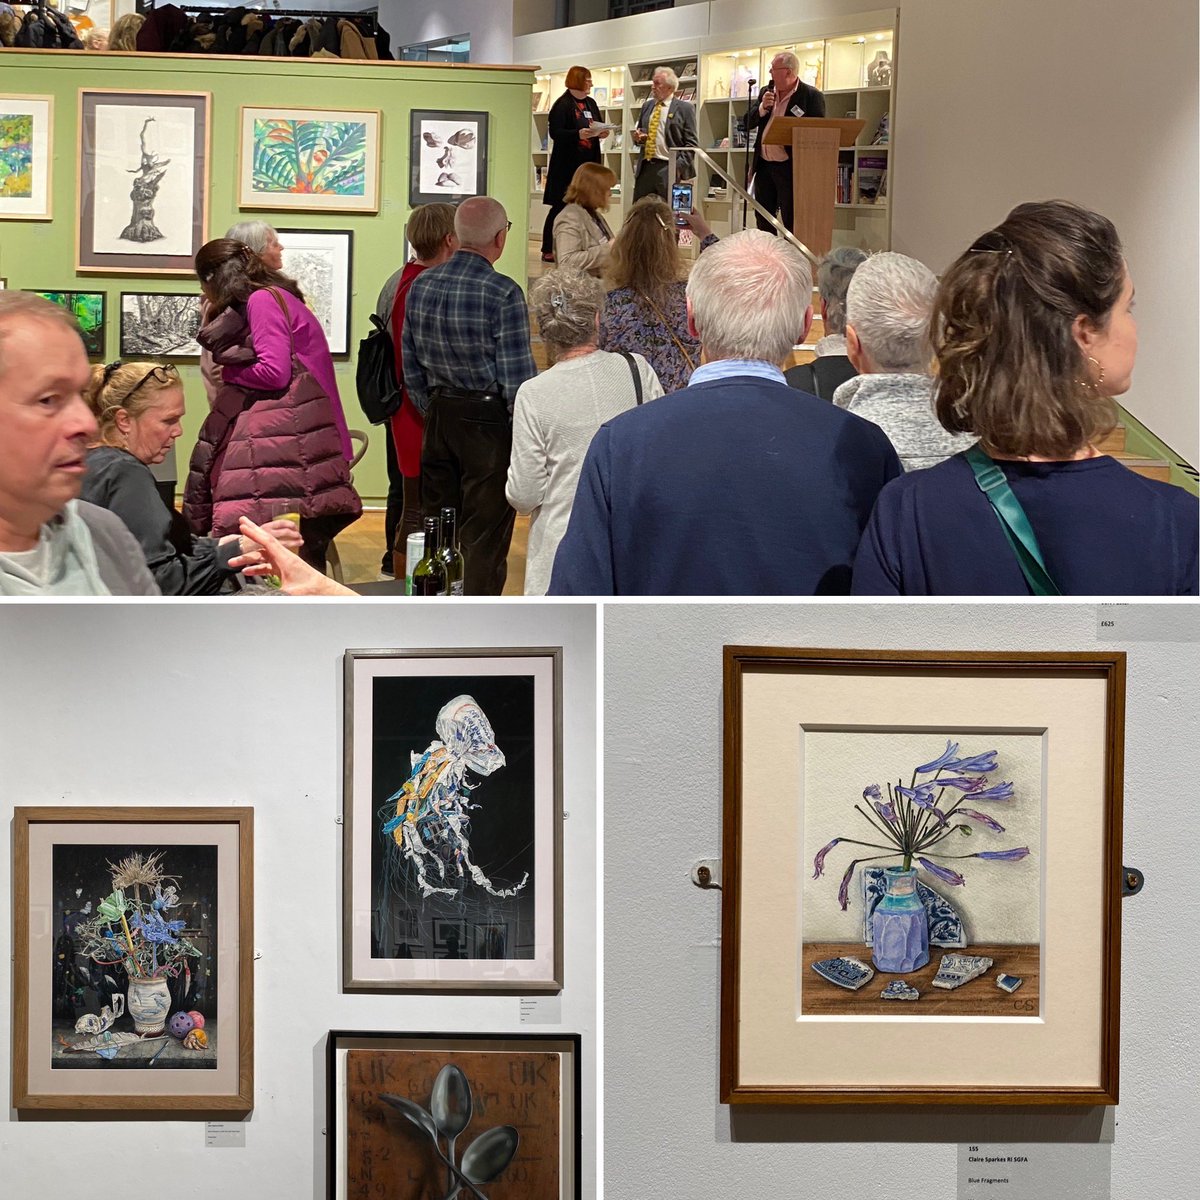 Great Private View last night of the 103rd Annual #Exhibition of the @SGFADrawing @mallgalleries The Exhibition continues until 16 March. #exhibitingartist #clairesparkes #paintings #drawing #watercolours #stilllife #figurative #narrative #artwork #londongallery #artcollector